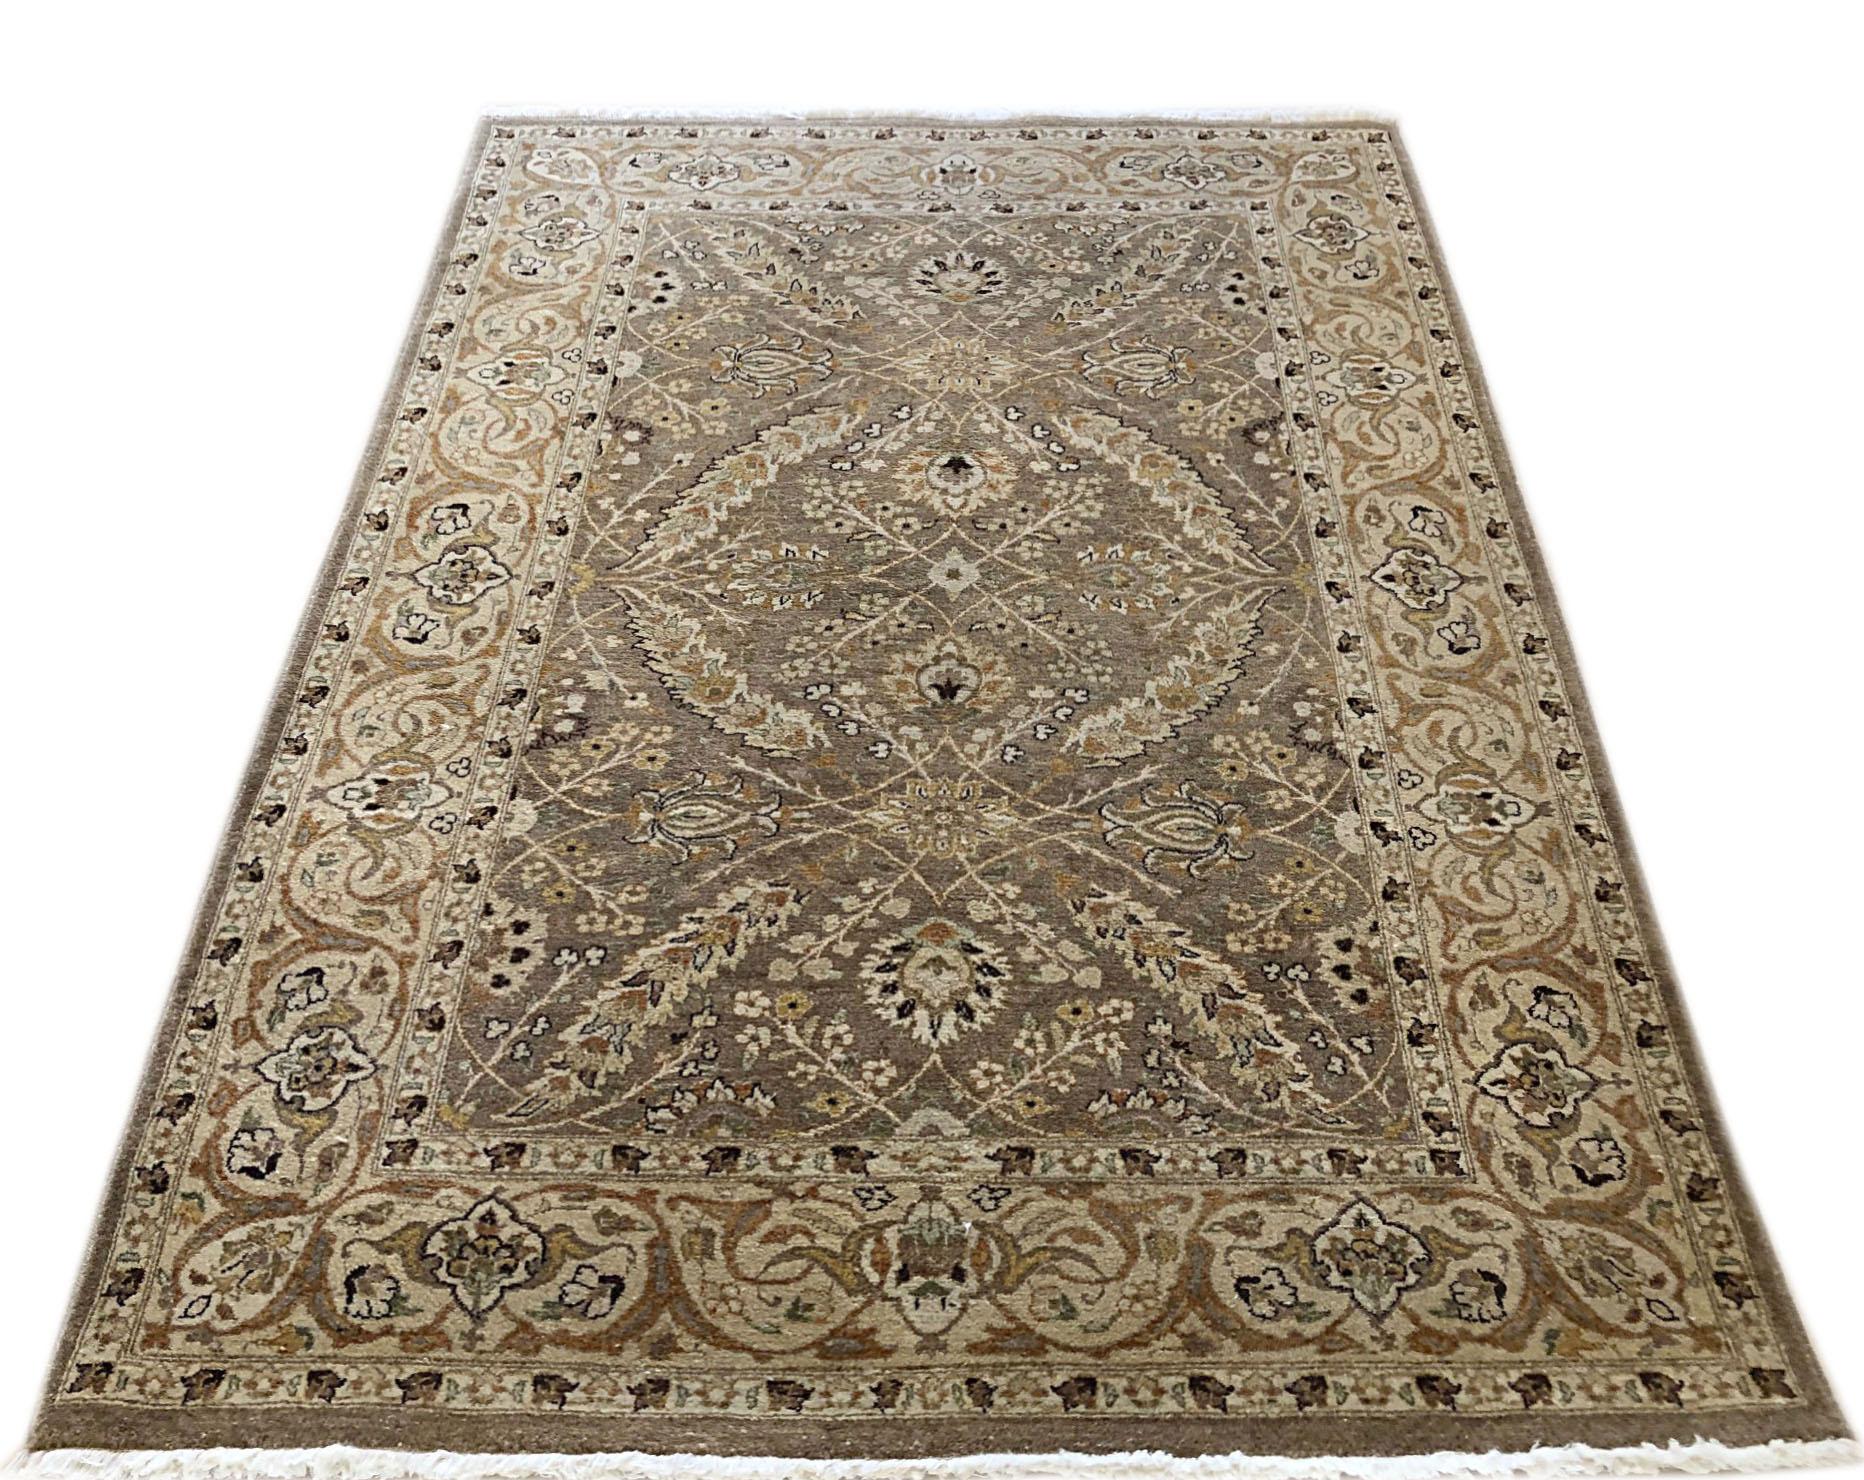 21st century hand knotted Pakistan rug with wool pile and cotton foundation. This piece has a floral pattern and the base color is light olive with cream border.
 